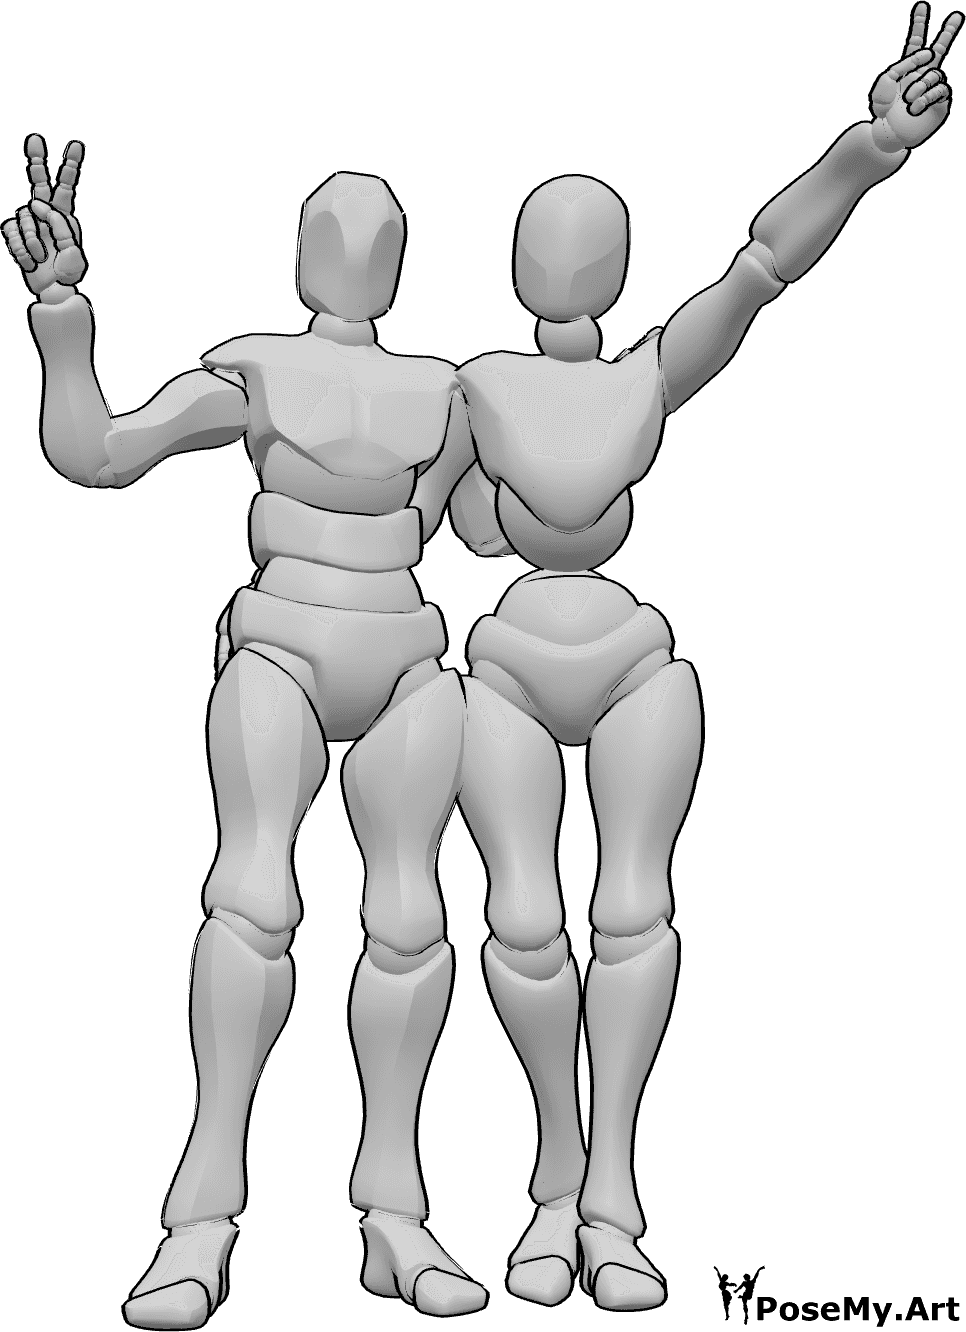 Pose Reference- Female male peace sign pose - Female and male are standing, hugging each other and showing peace sign